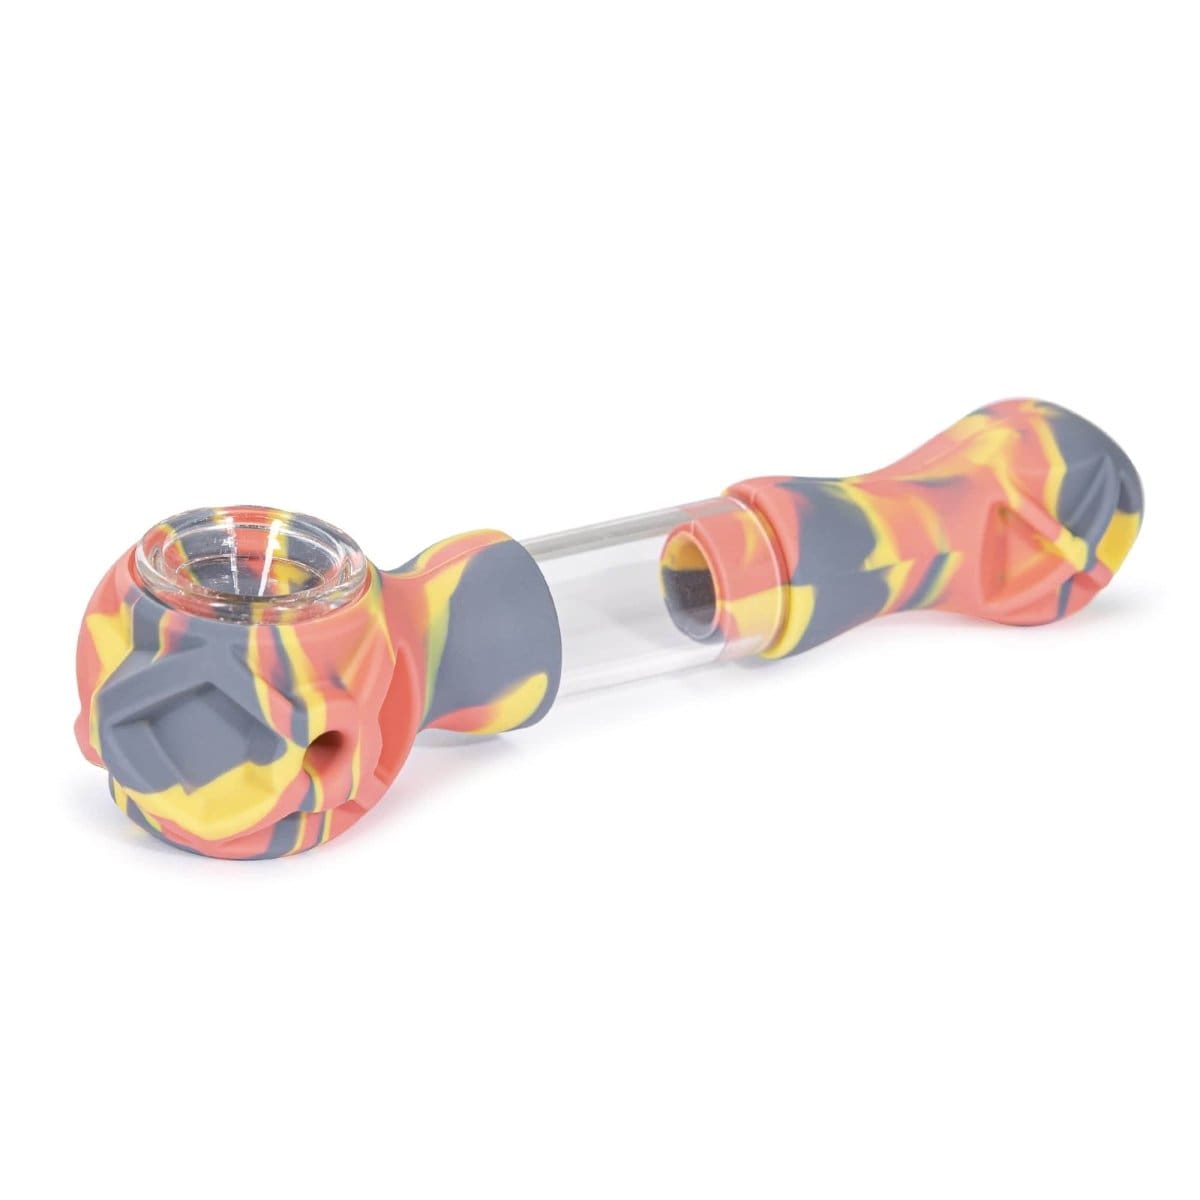 3 Gates Global Pipe Pink/Yellow/Grey Hybrid Silicone and Glass Spoon with Translucent Chamber